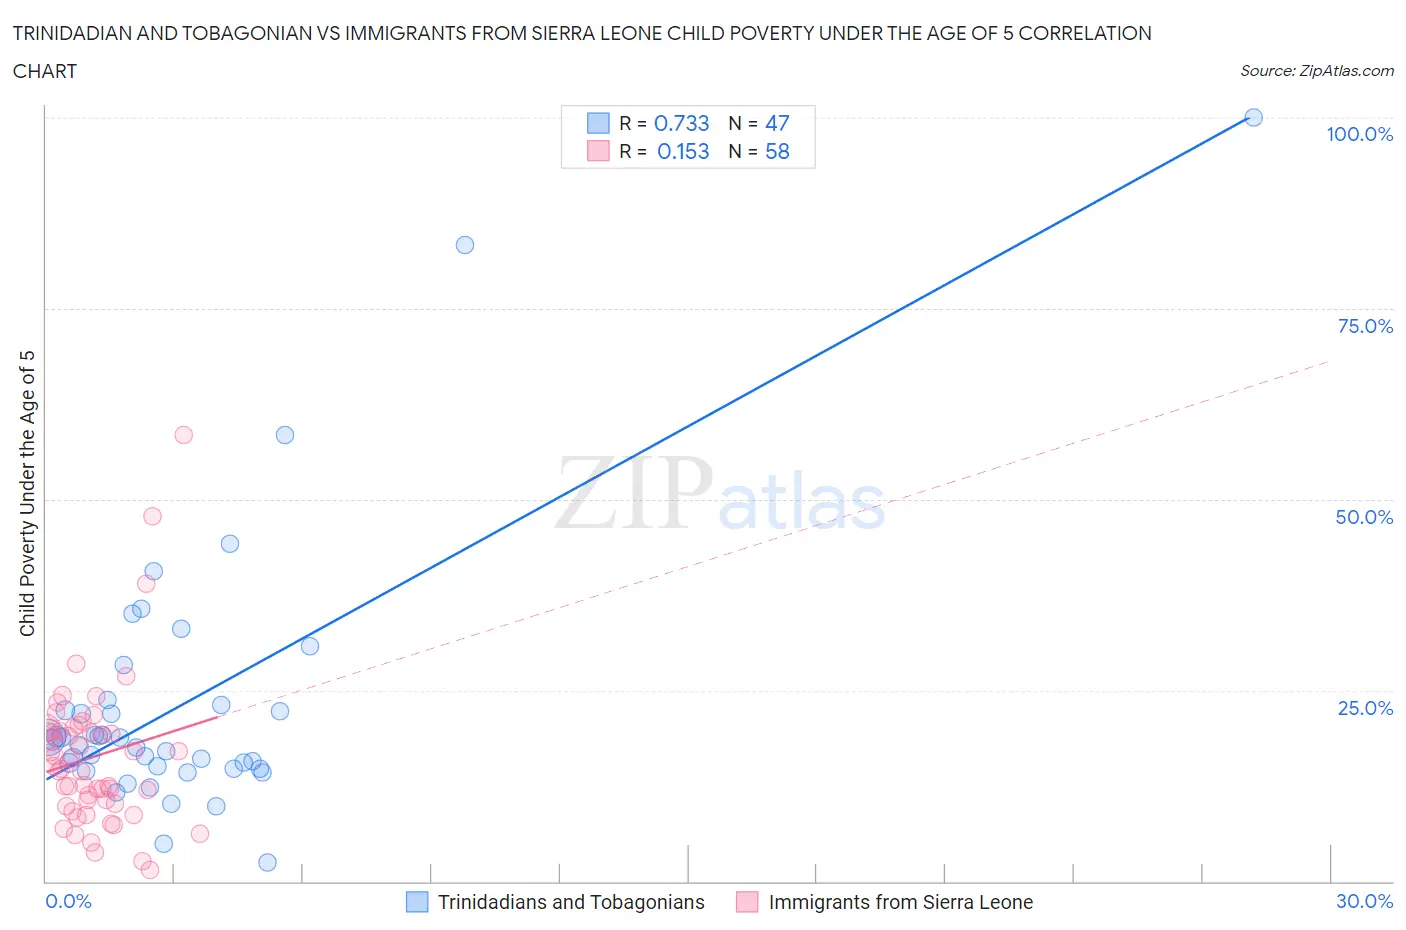 Trinidadian and Tobagonian vs Immigrants from Sierra Leone Child Poverty Under the Age of 5